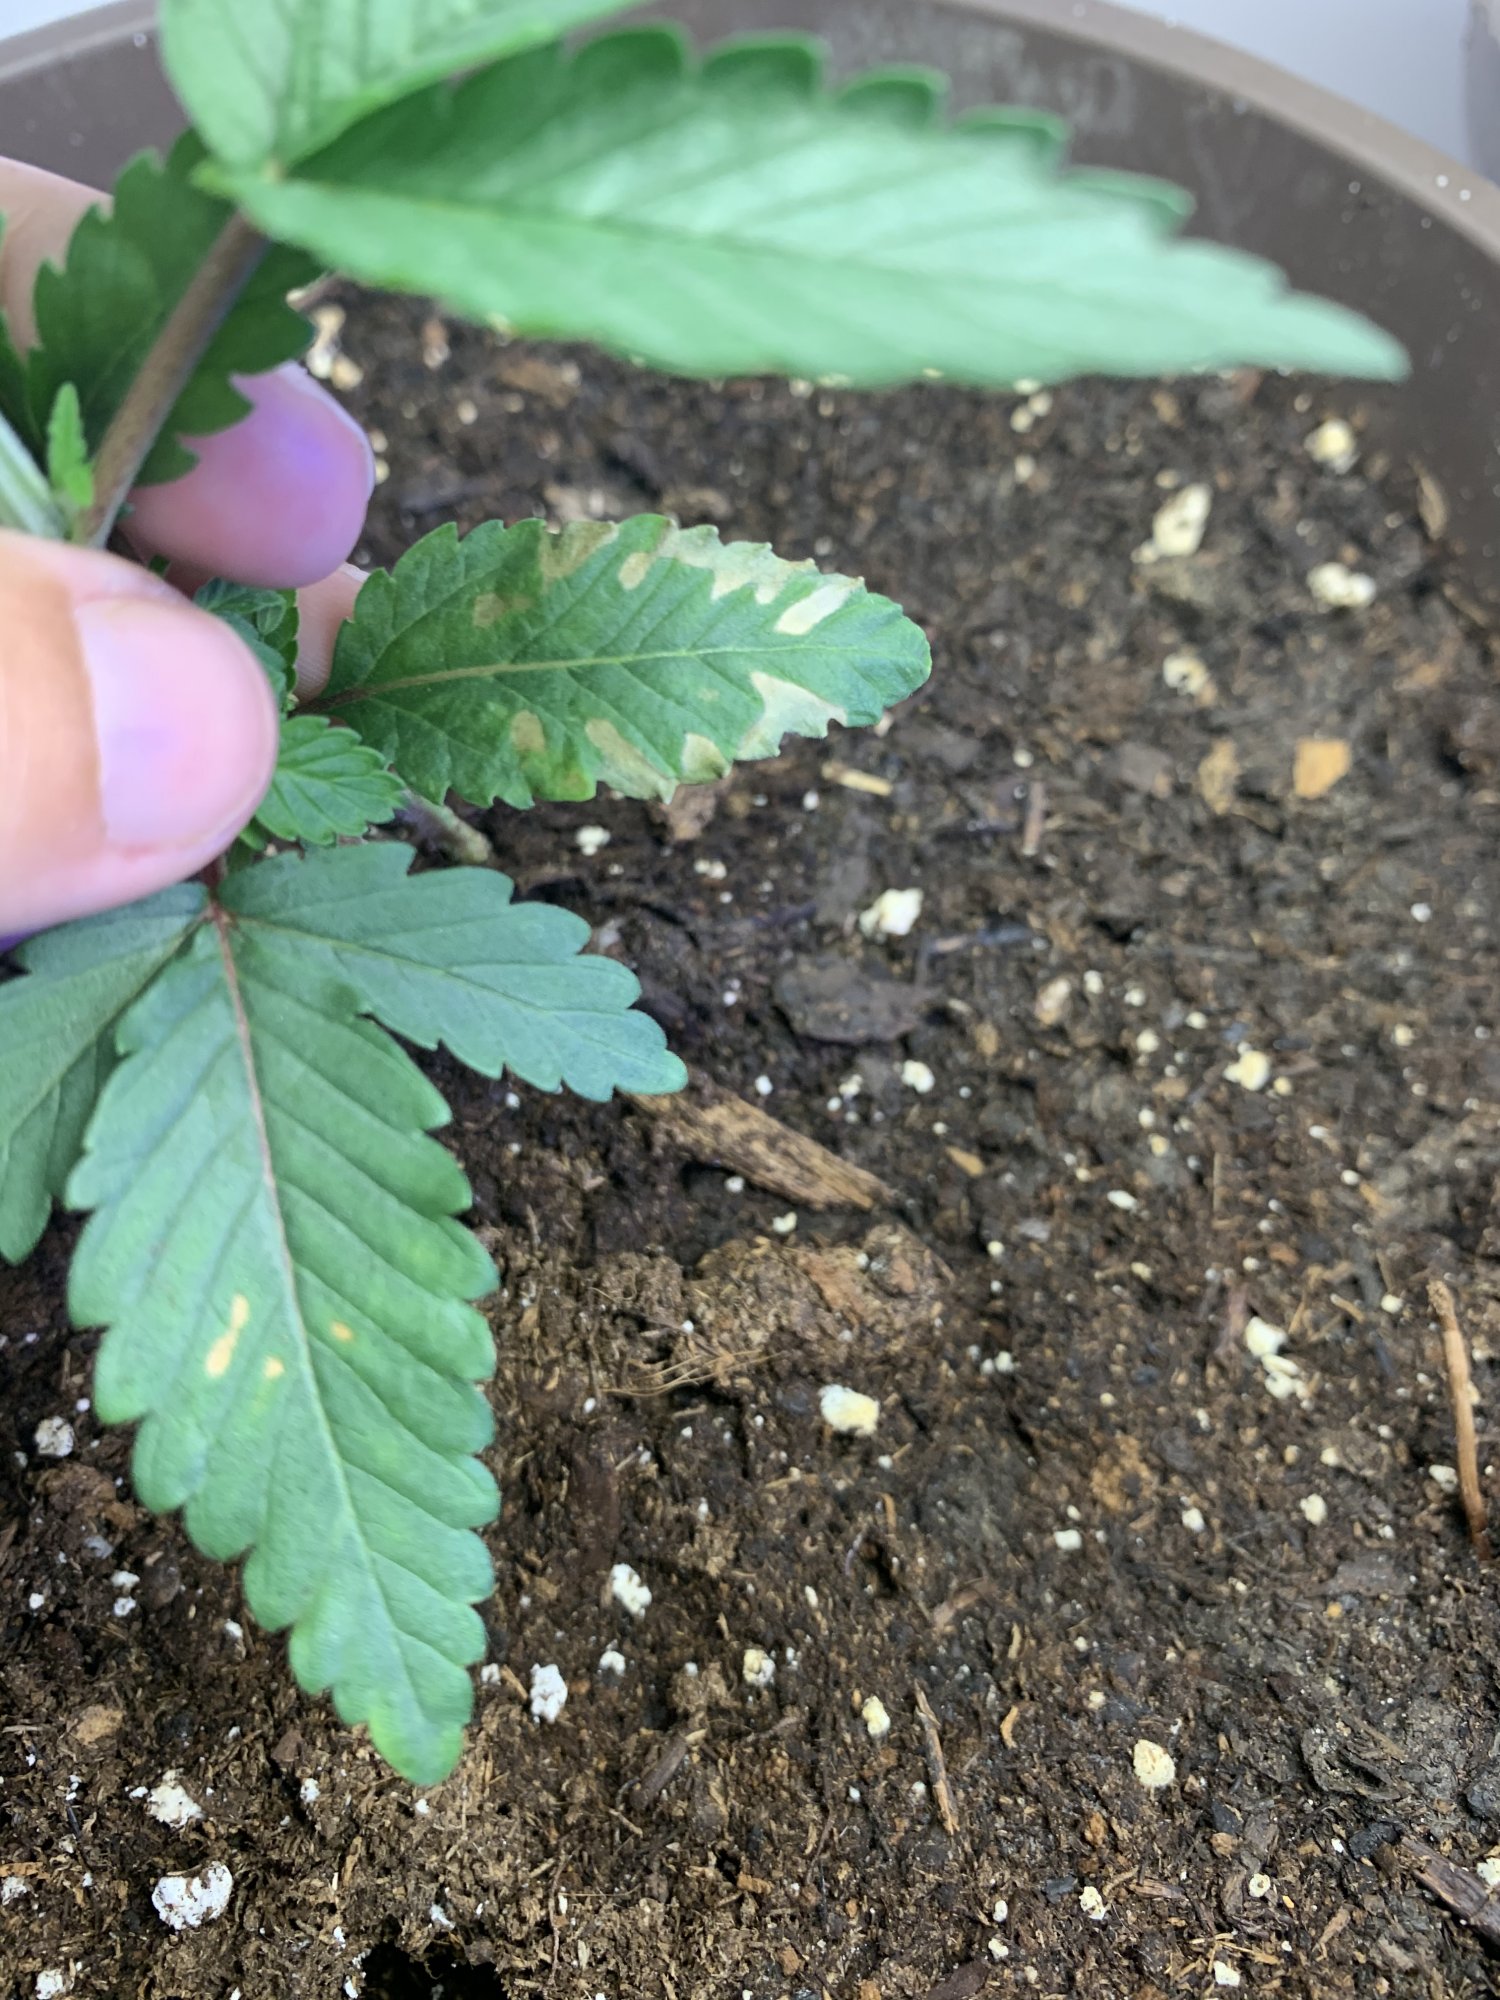 Browningyellowing areas on bottom leaves 3